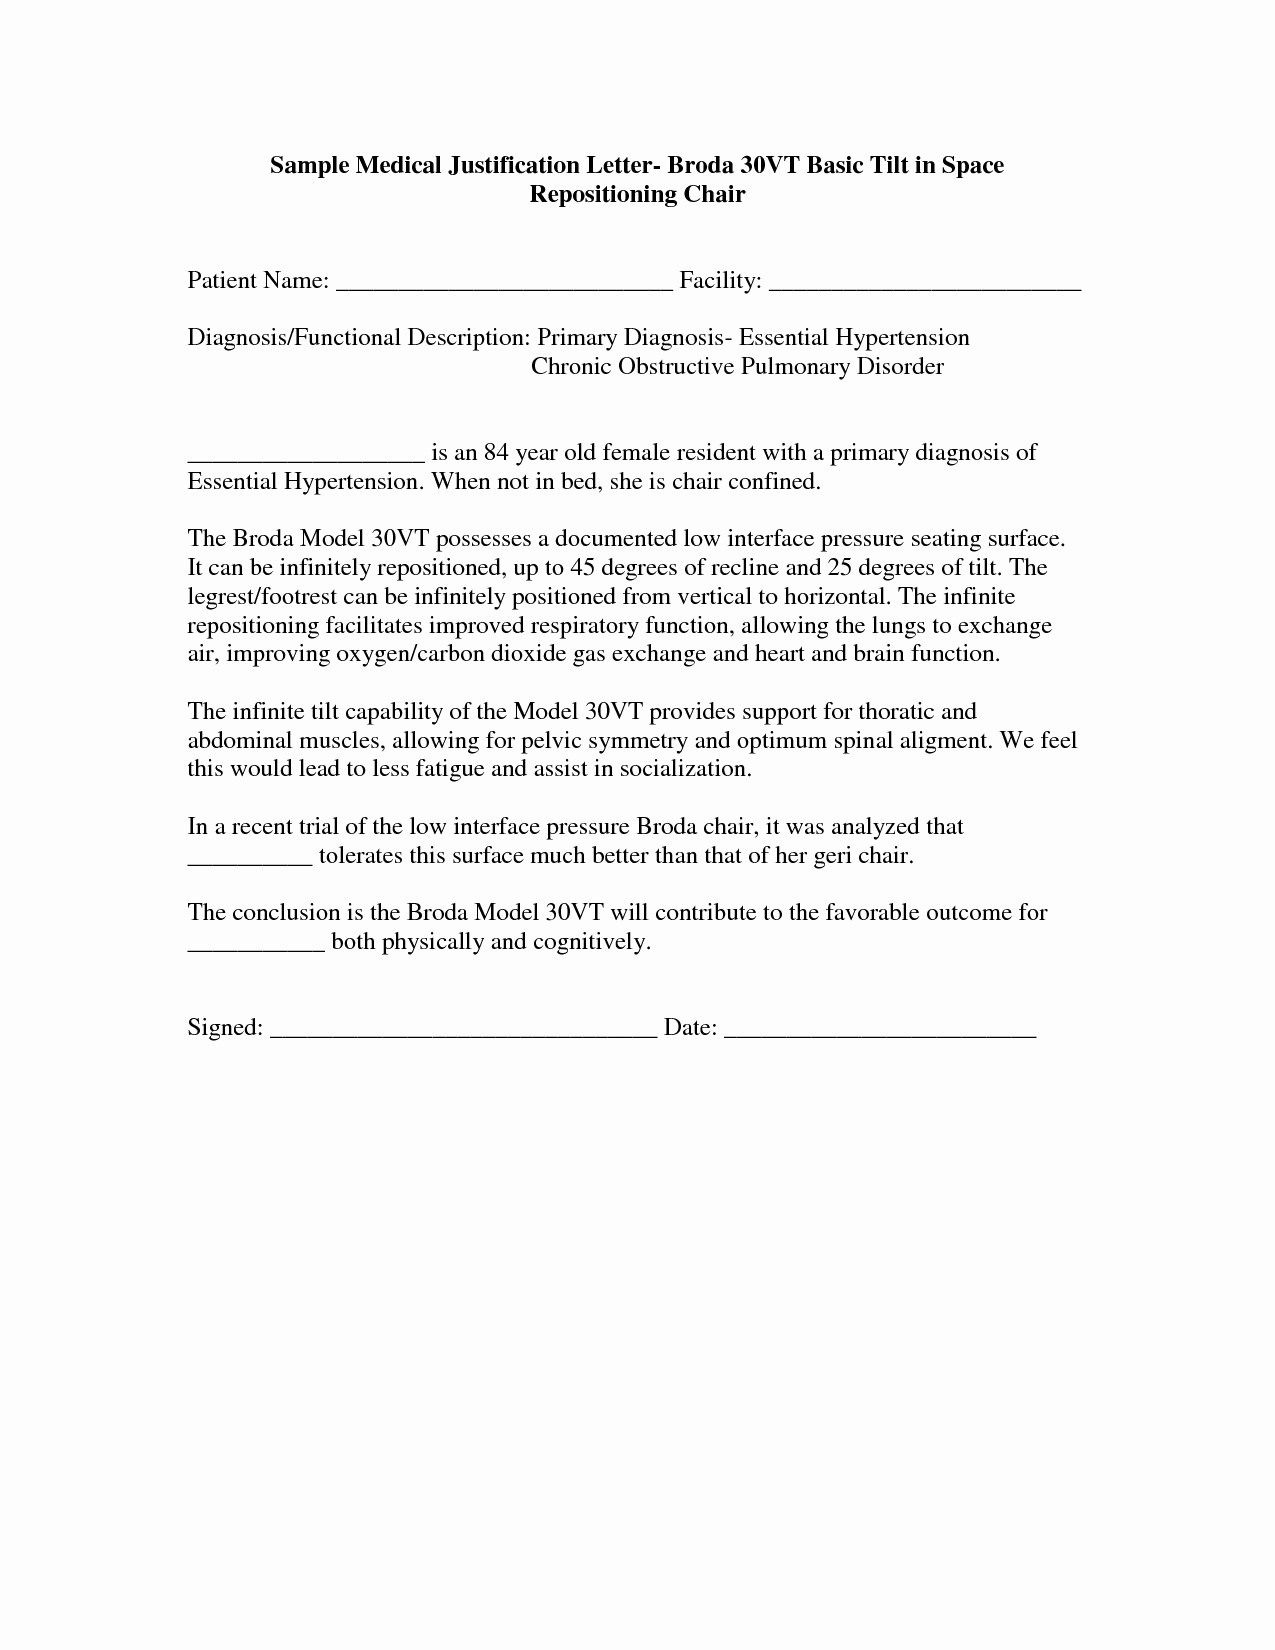 Sample Justification Letter For Purchase Of Equipment Peterainsworth